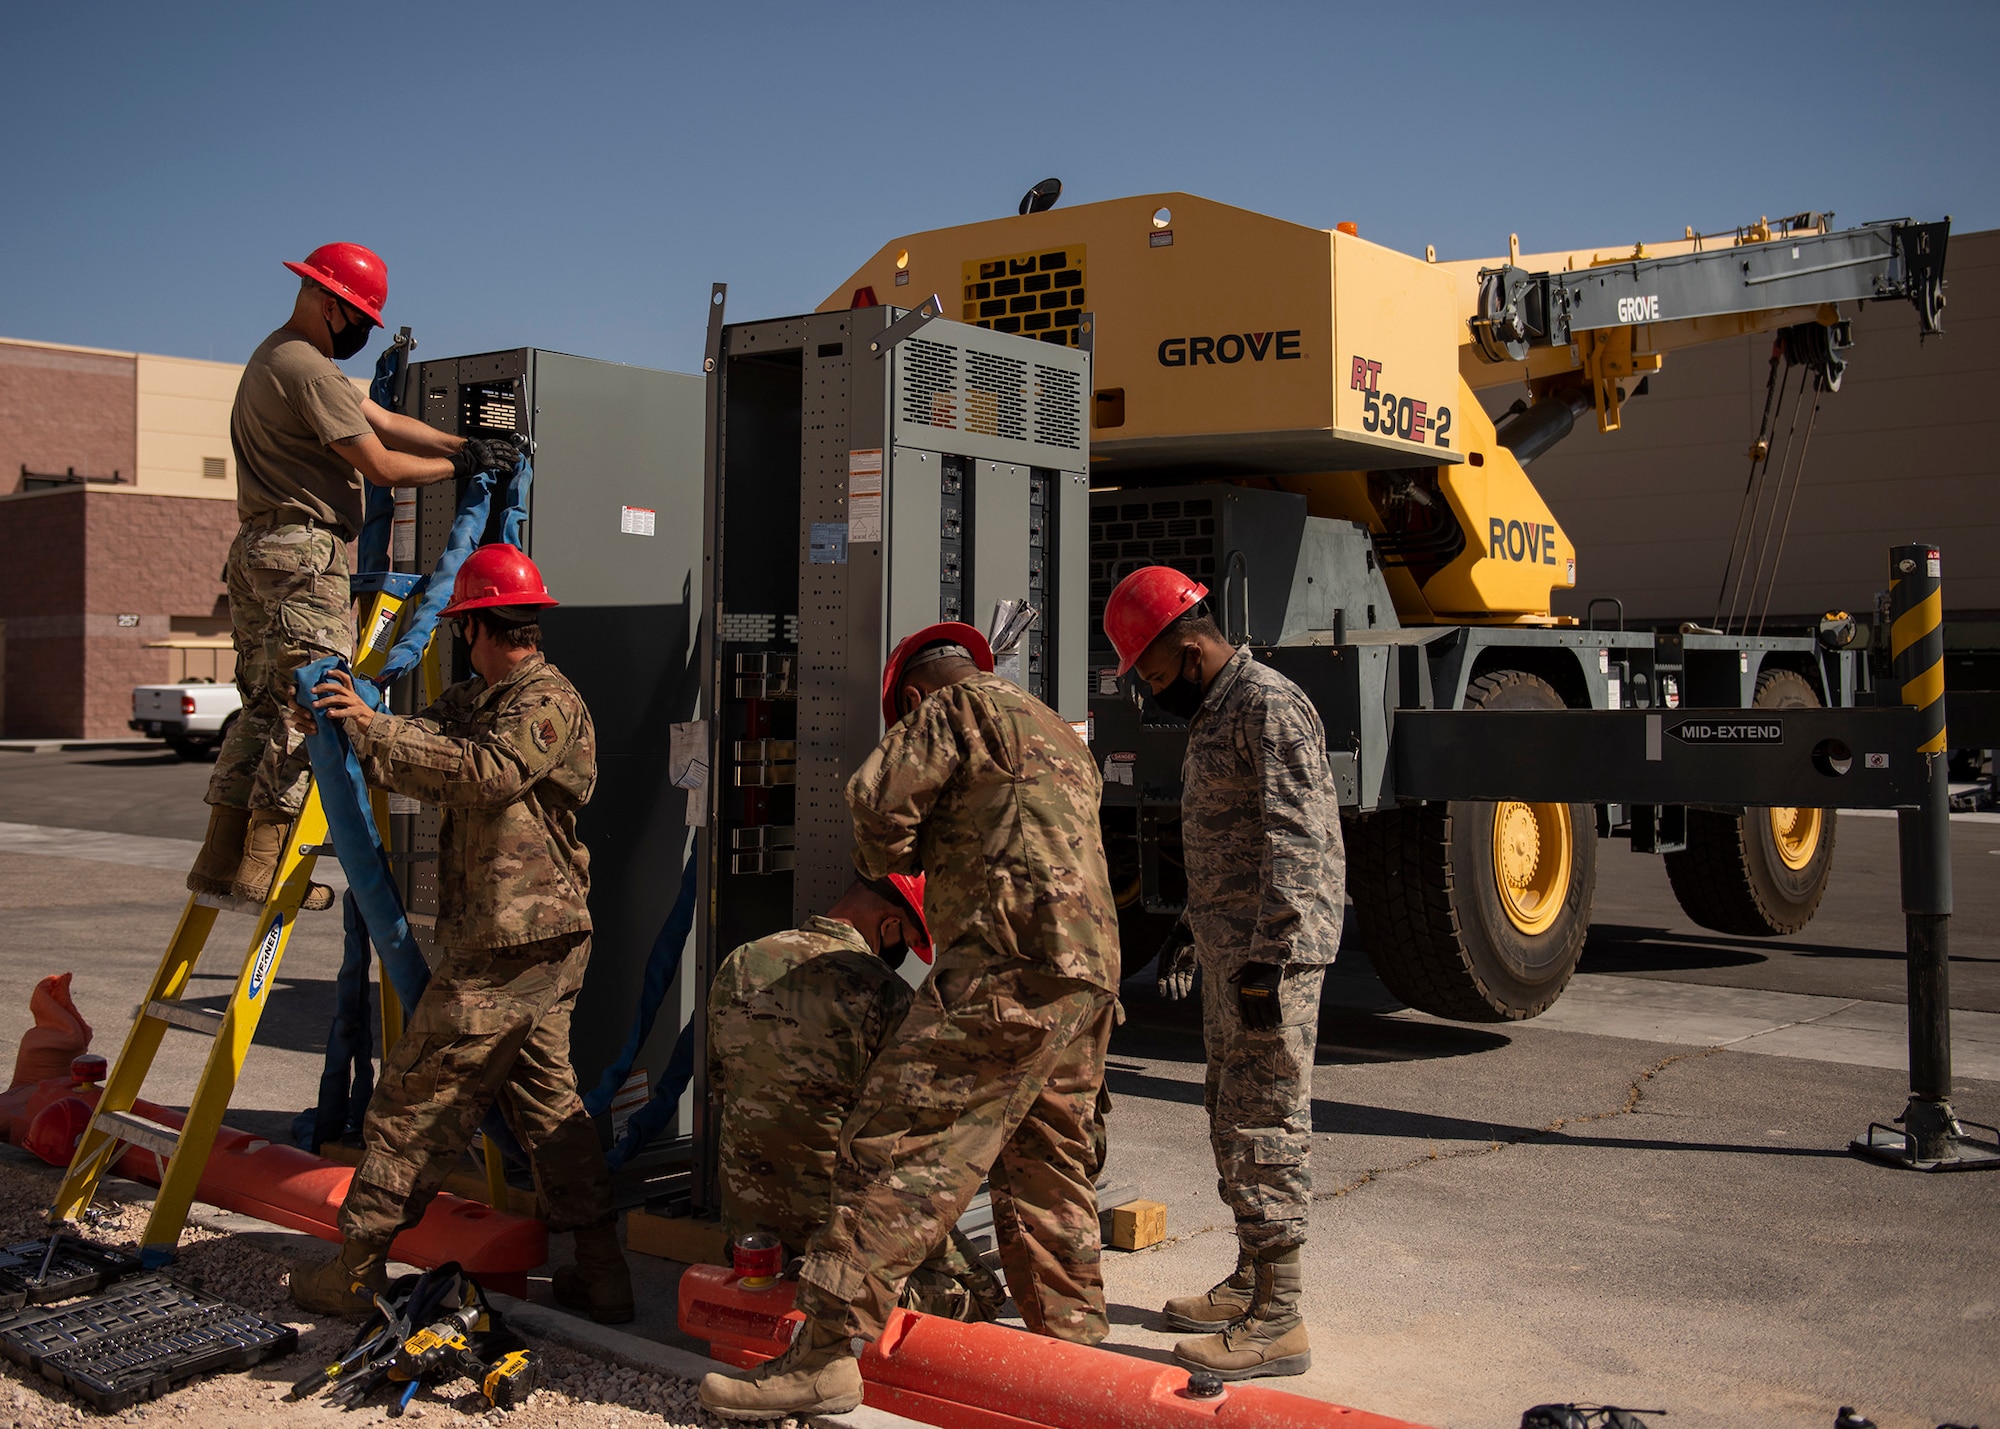 Five RED HORSE Airmen prepare a gearbox to be lifted by a 30-ton crane.